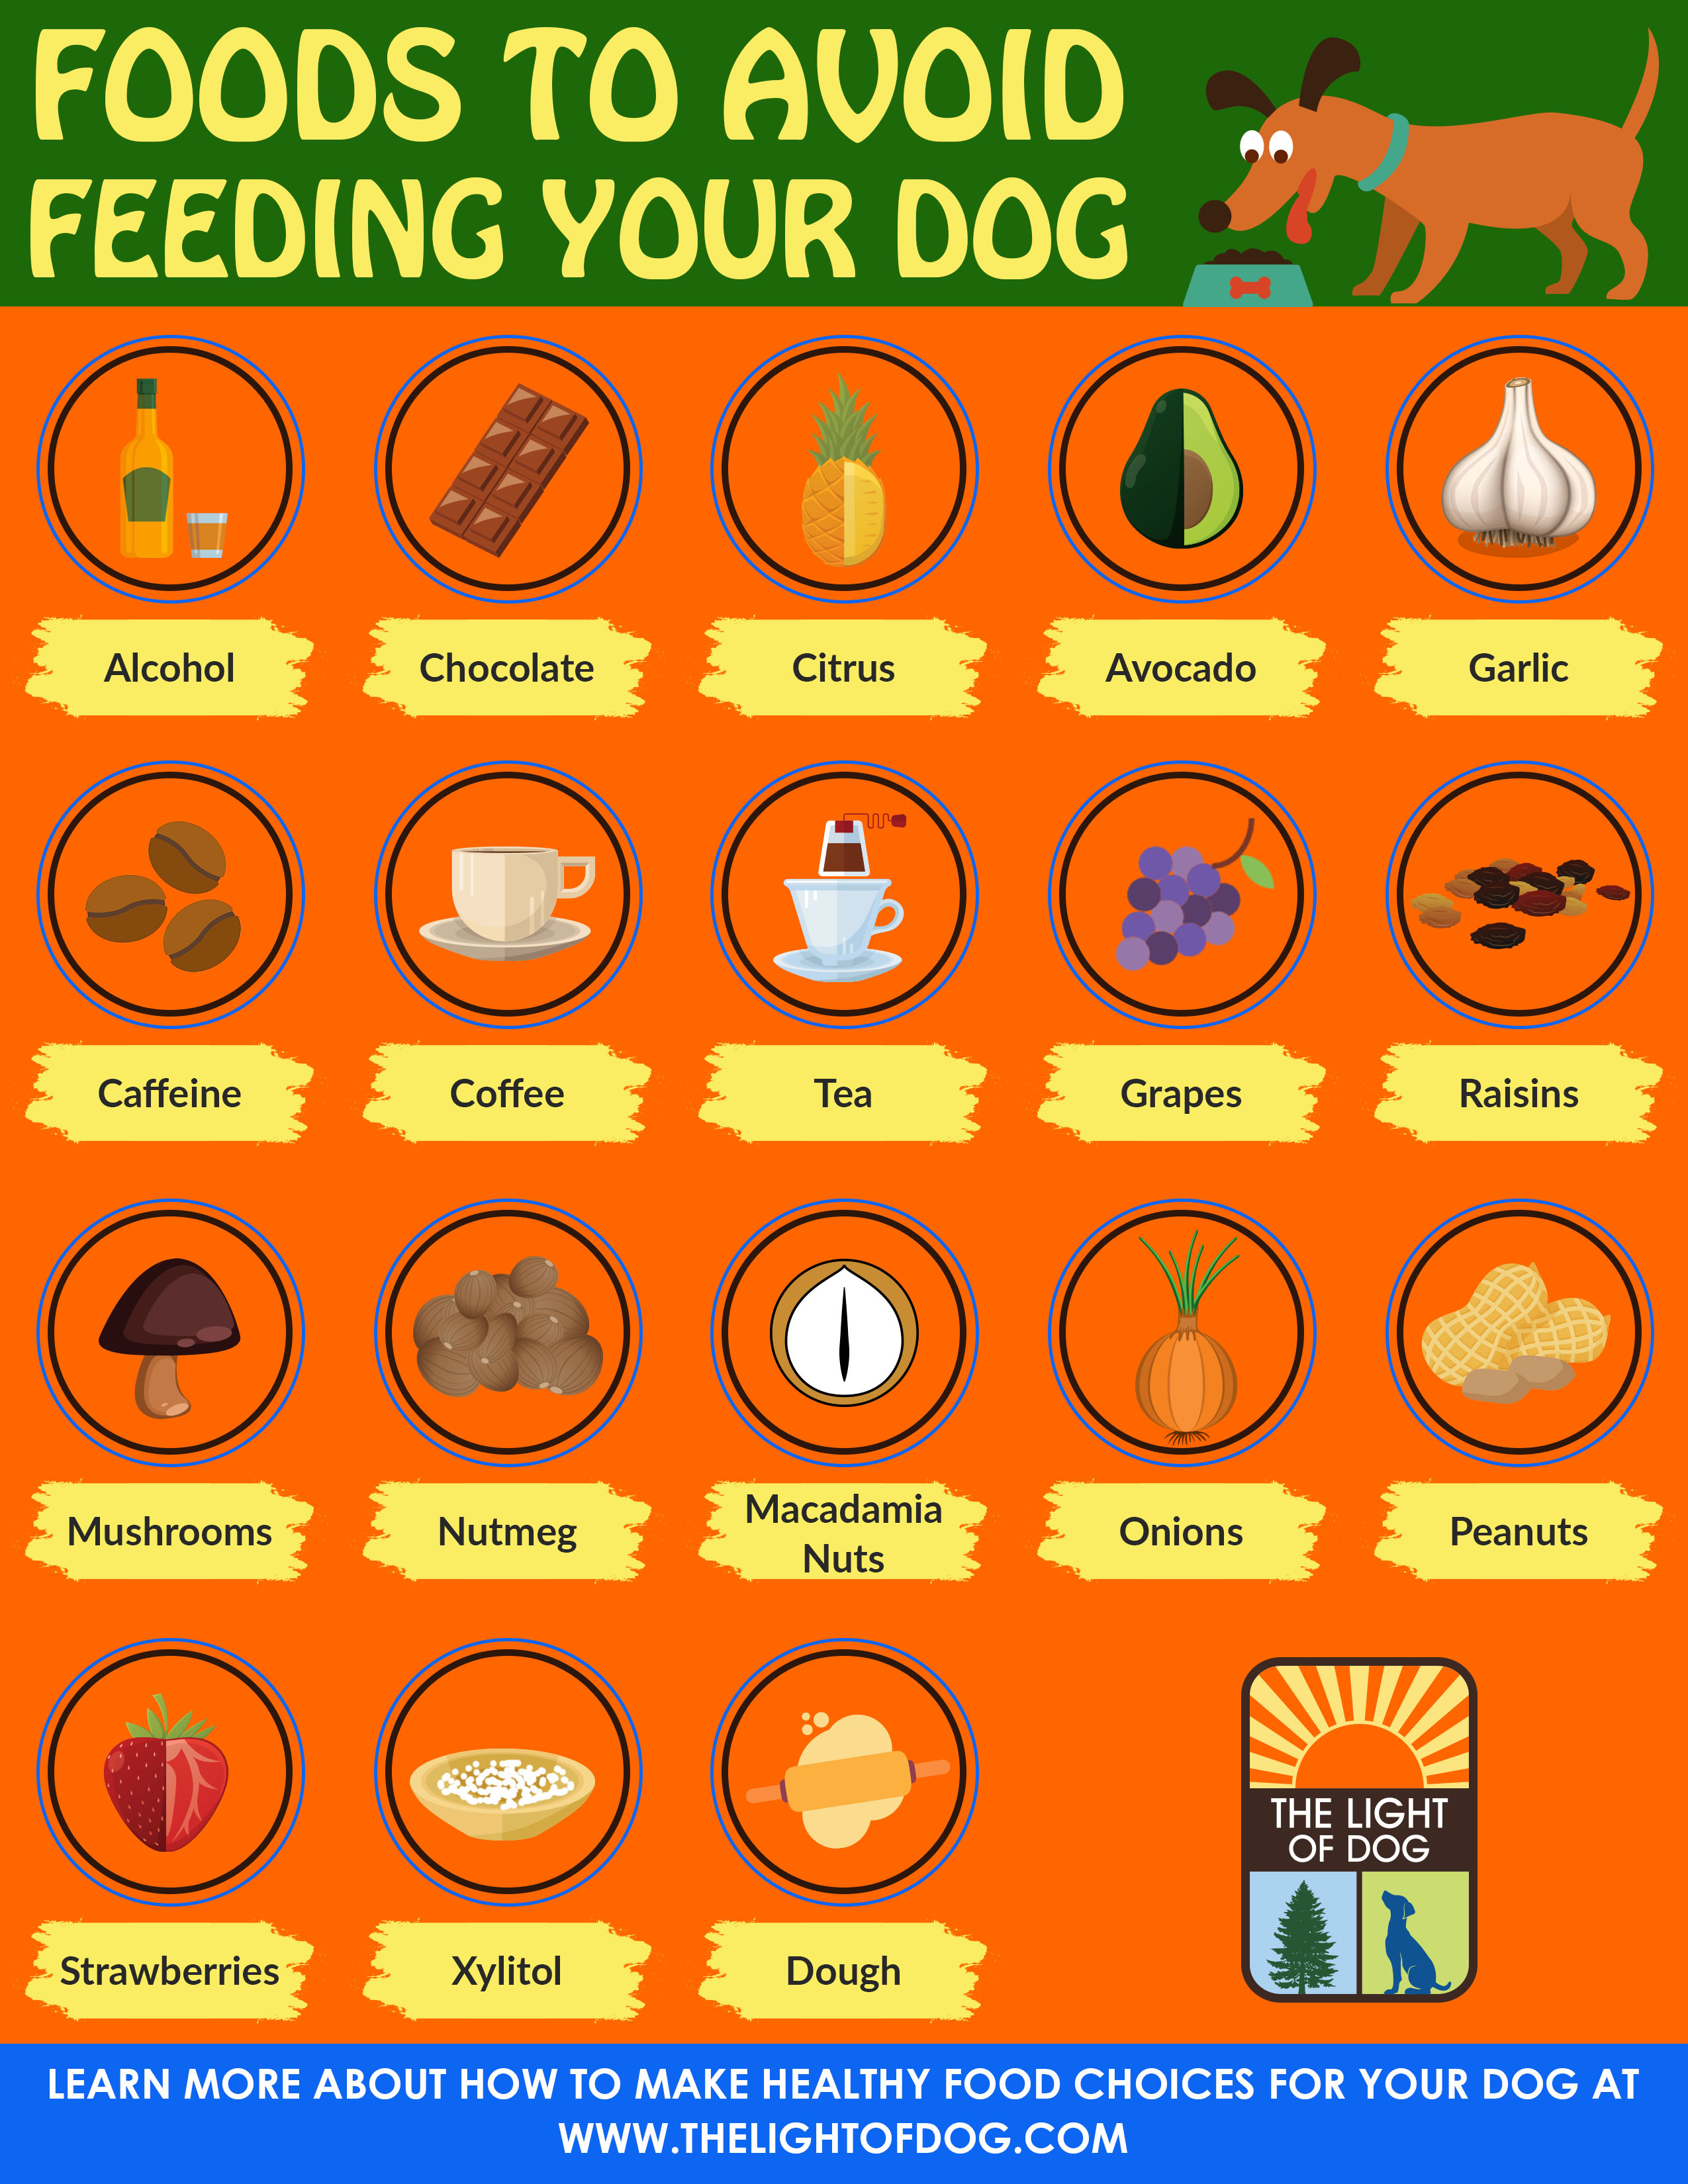 Foods to avoid feeding your dog